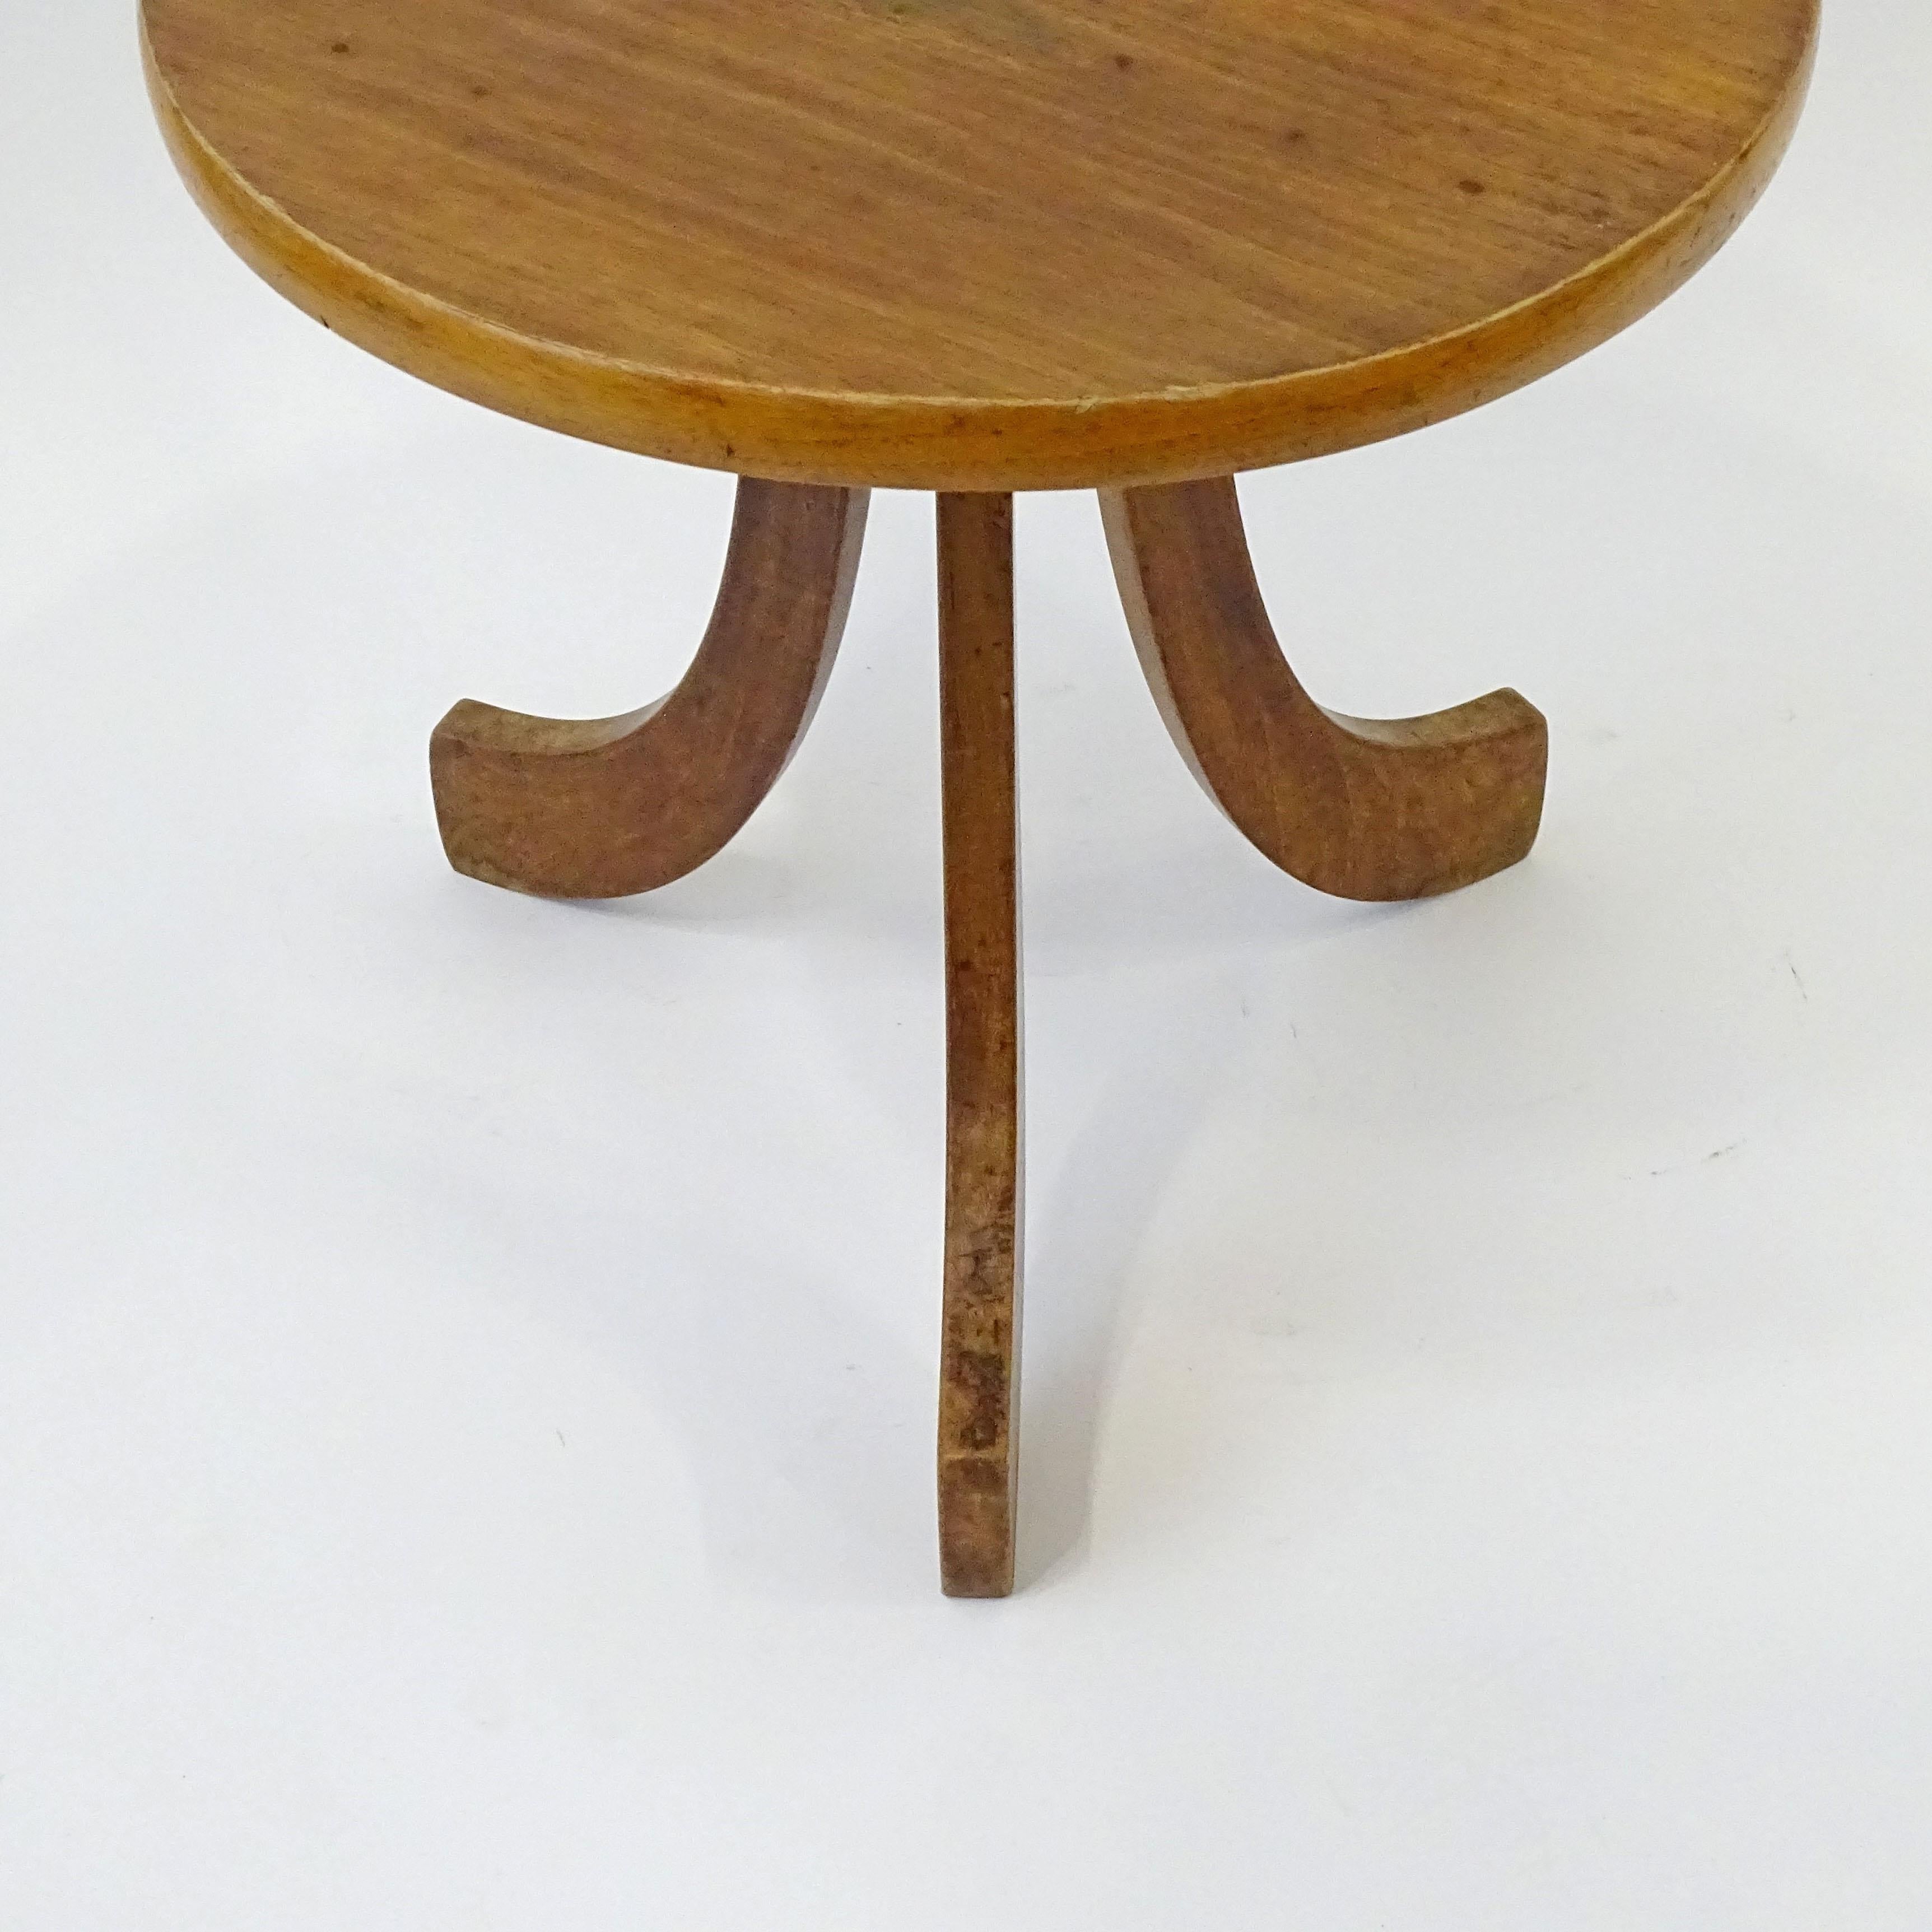 Italian 1940s Folk Art Wood Side Table with three Scrolled Legs For Sale 1